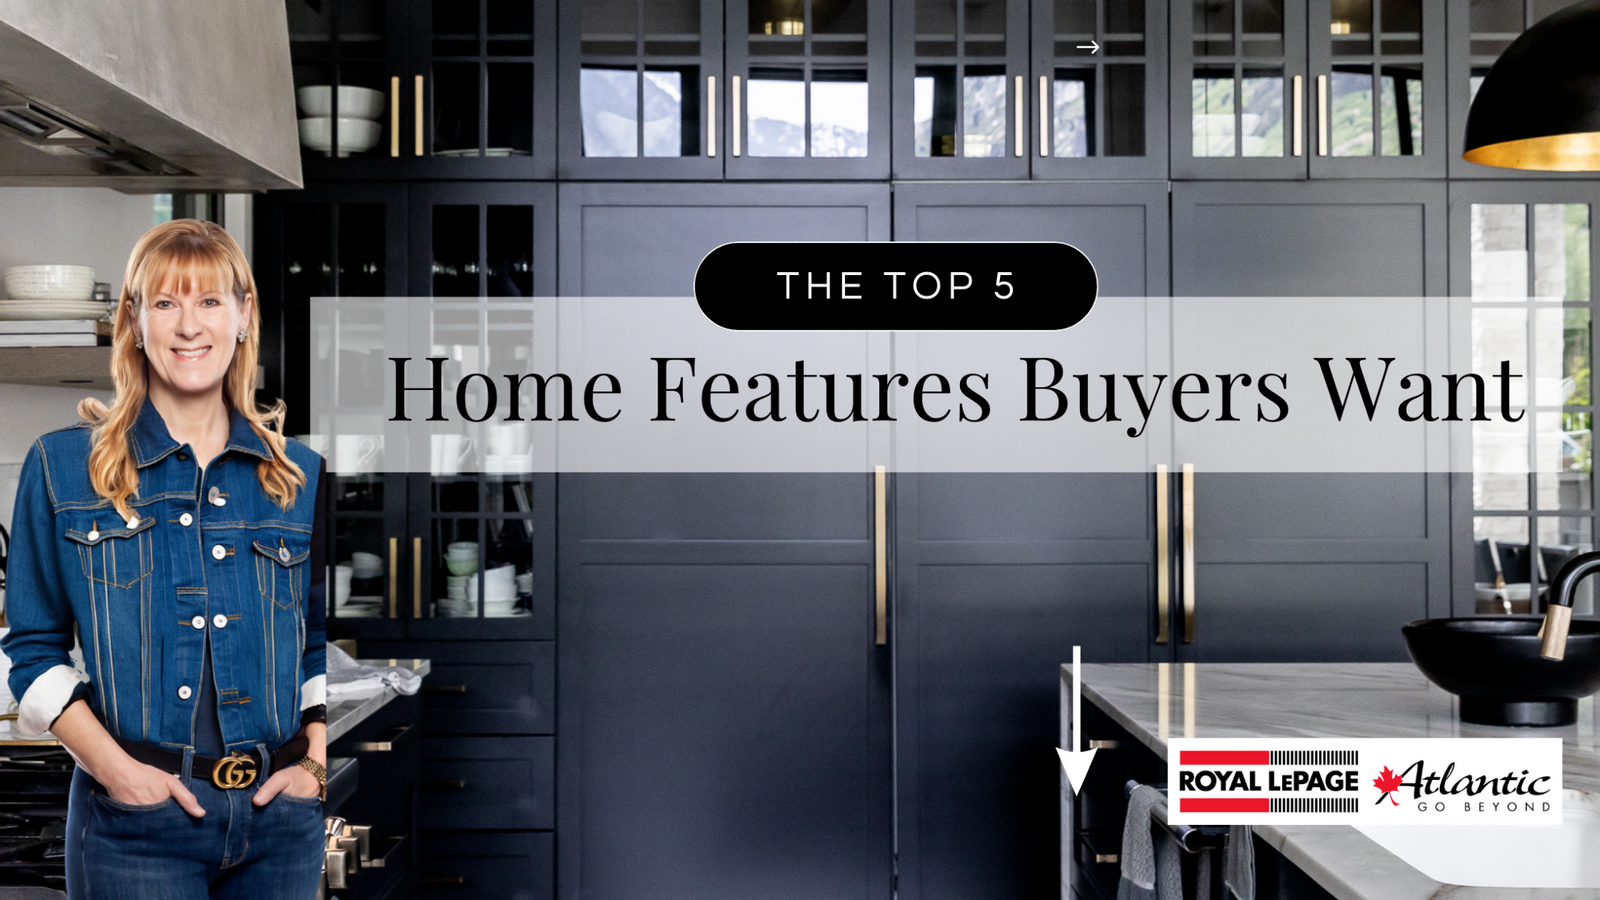 What Exactly Are Buyers Looking for in a Home?